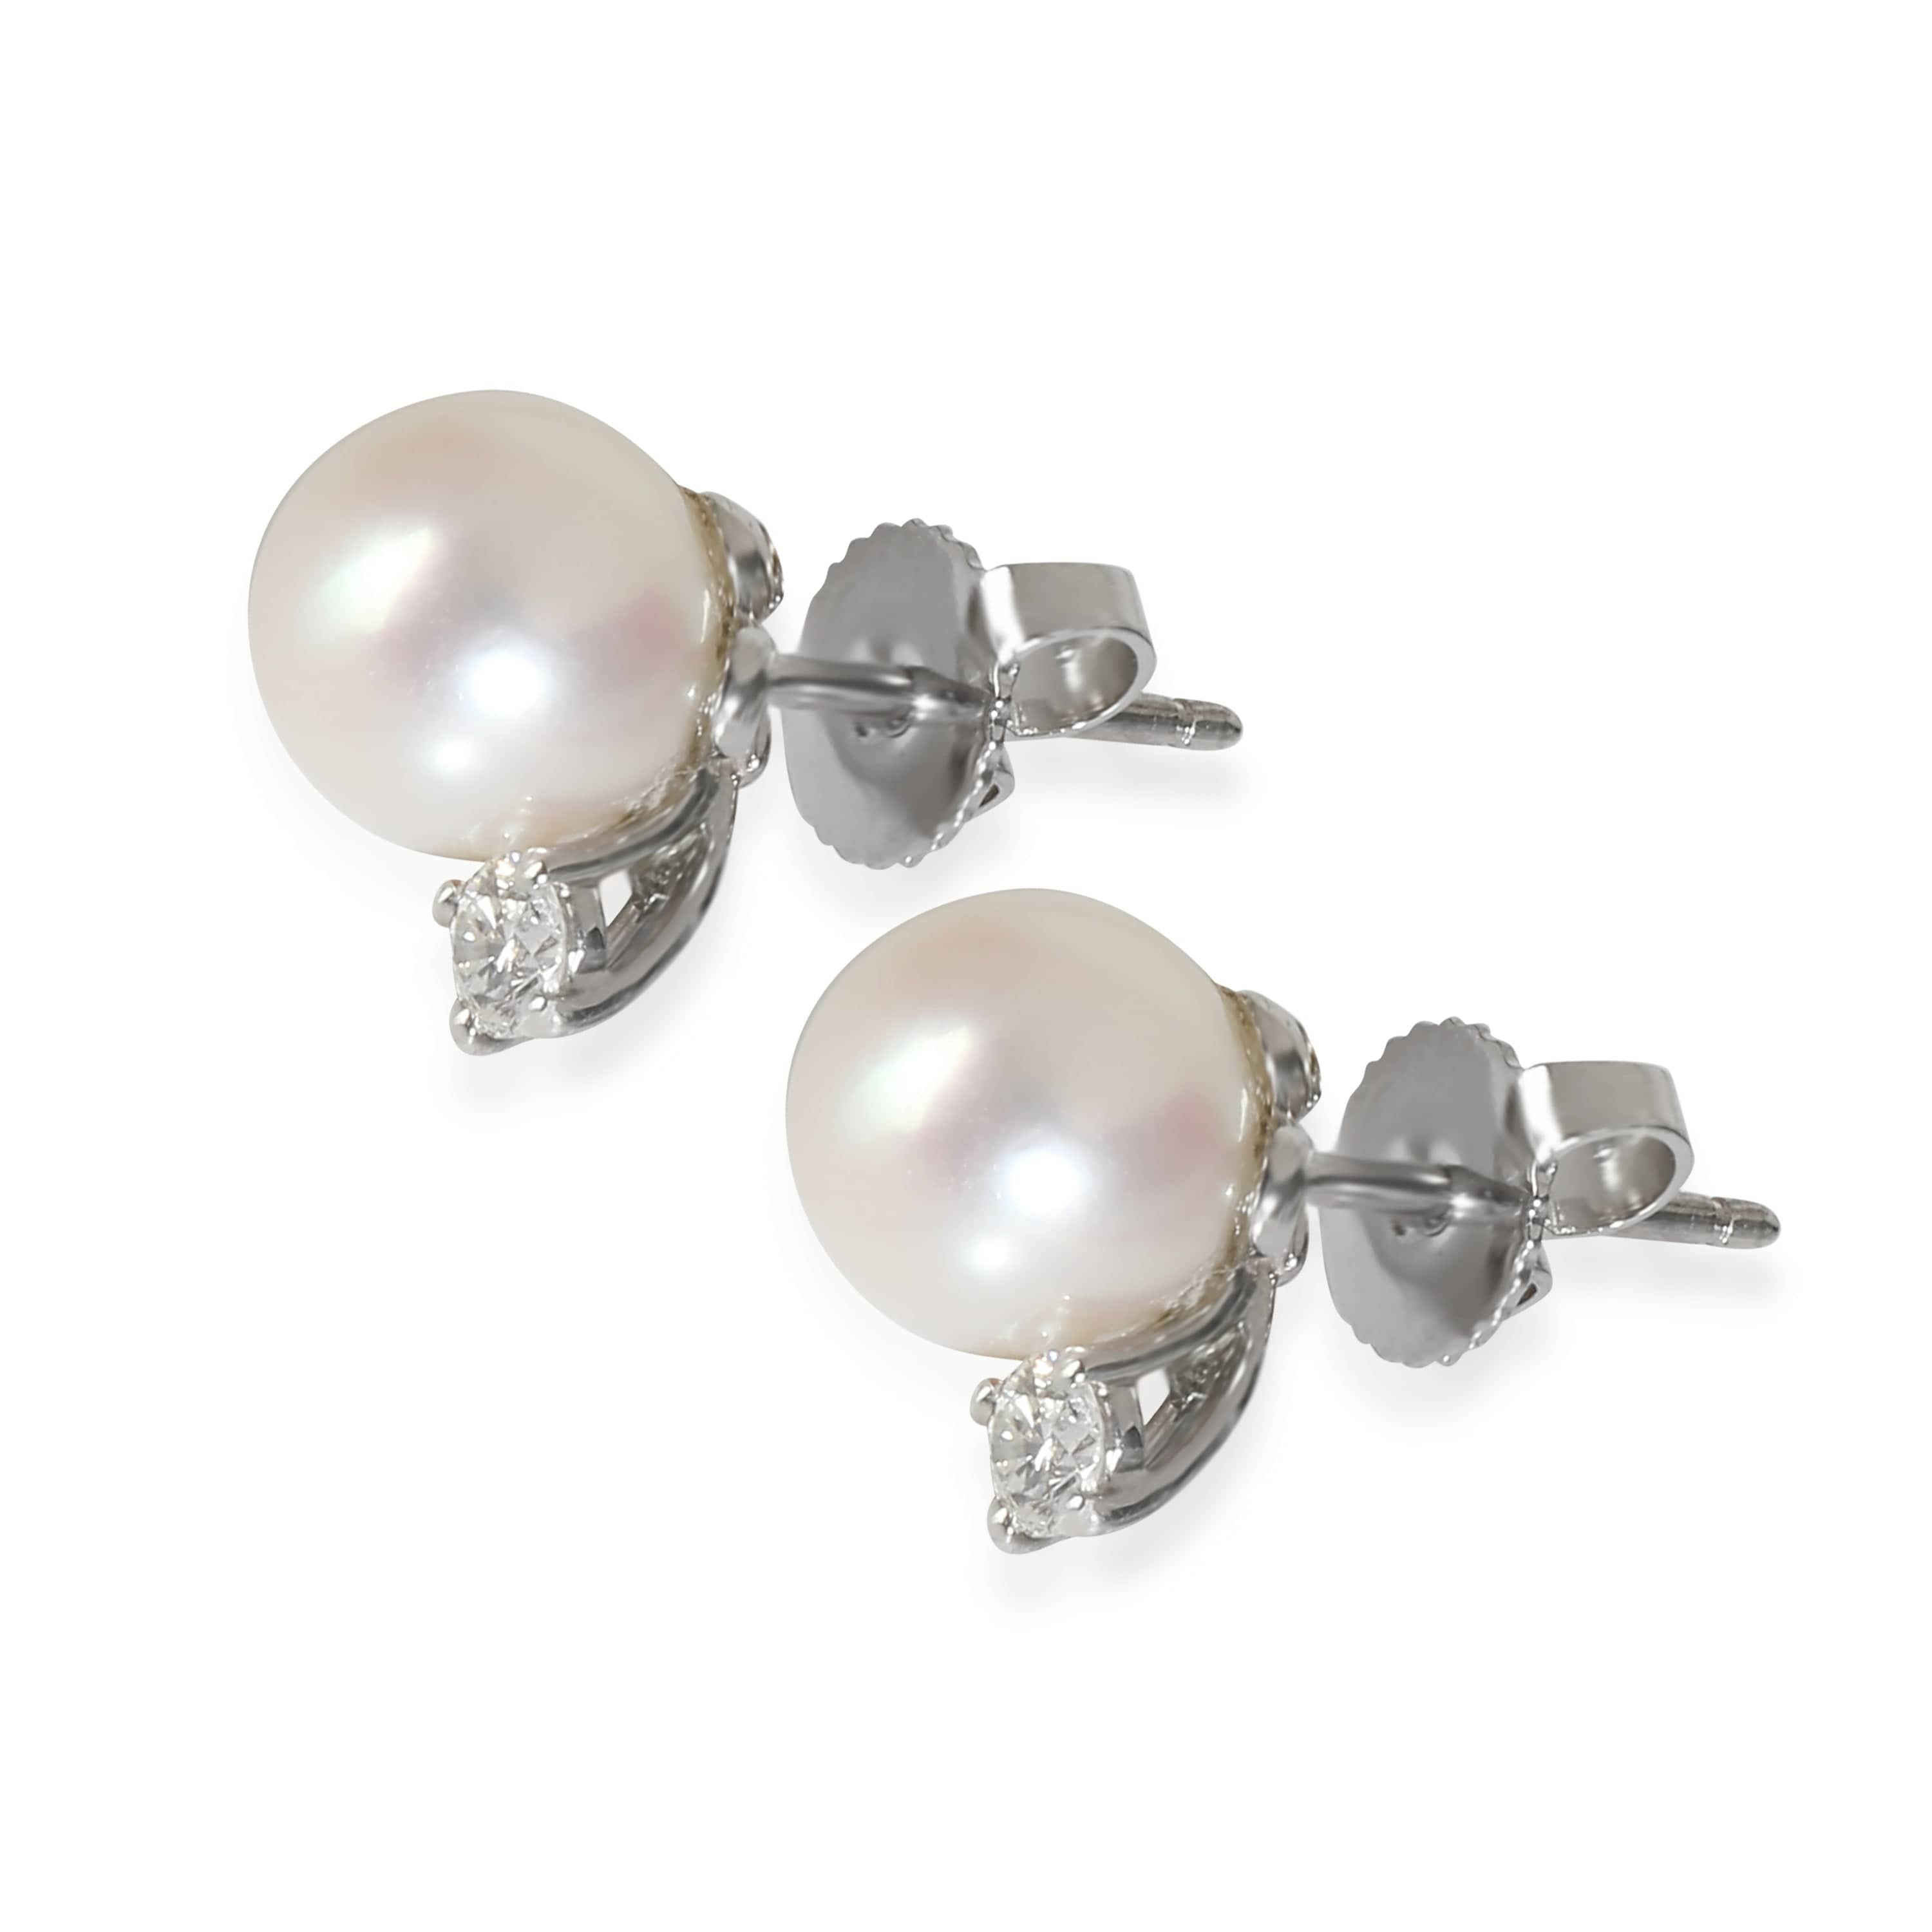 Tiffany & Co. Signature Pearls Stud Earrings in 18k White Gold